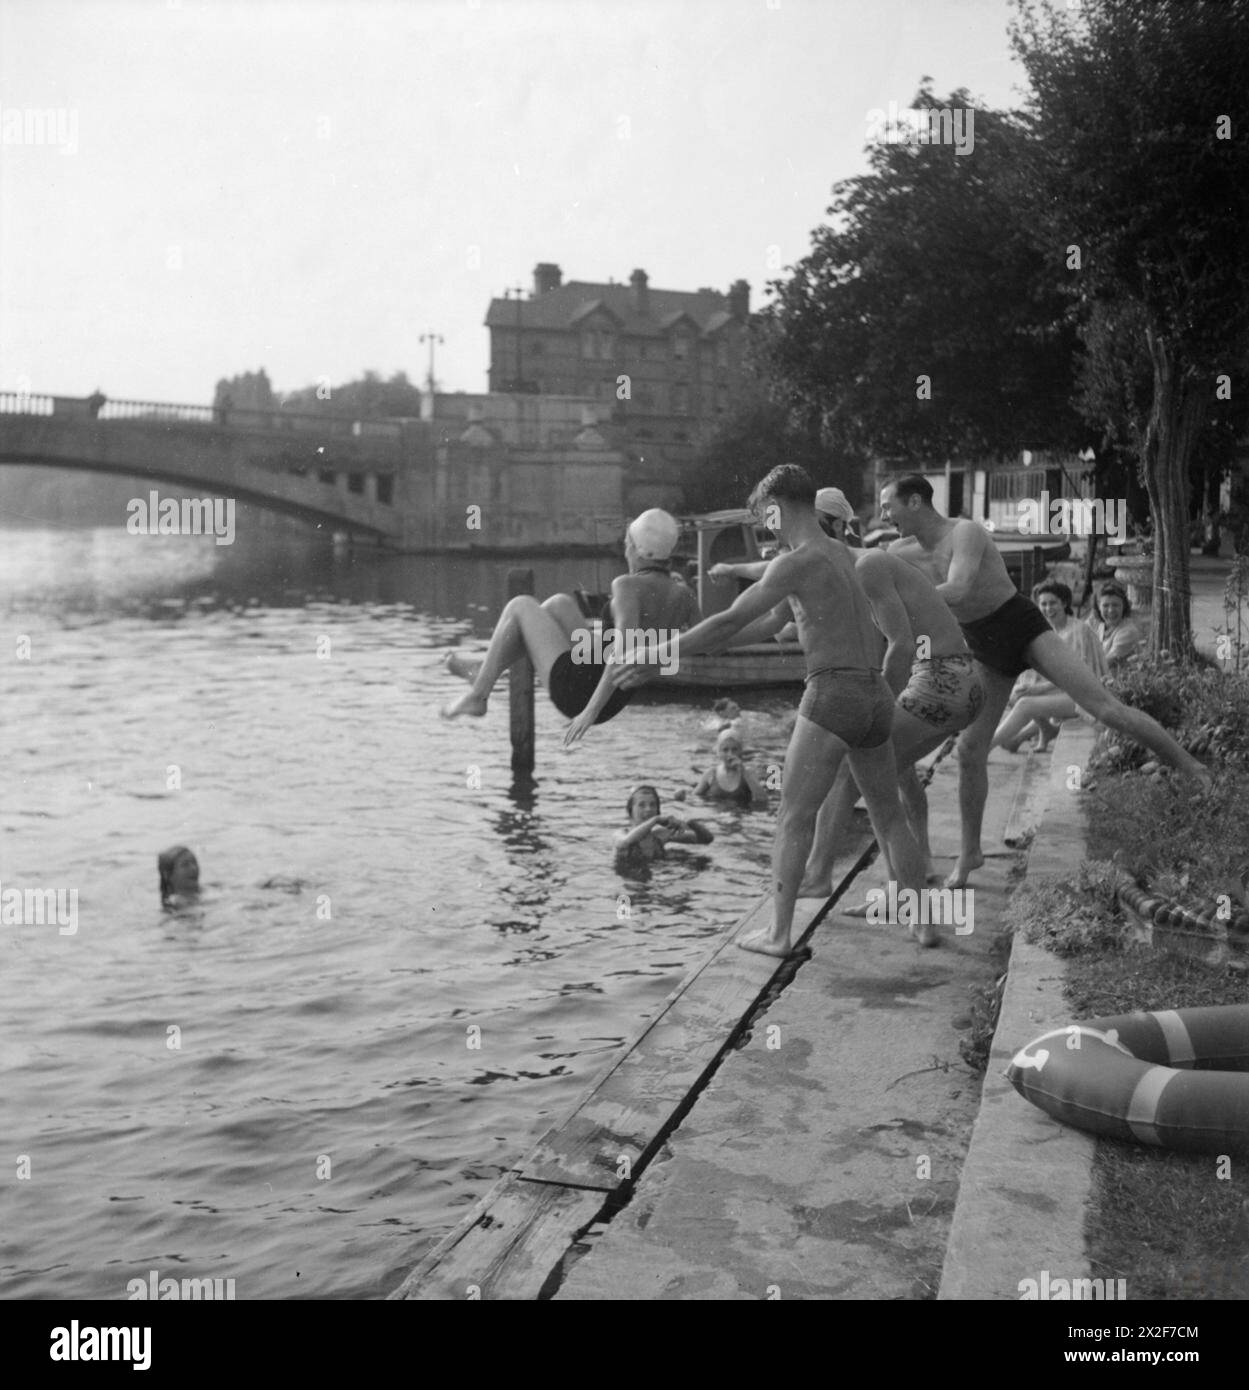 A PICTURE OF A SOUTHERN TOWN: LIFE IN WARTIME READING, BERKSHIRE, ENGLAND, UK, 1945 - A group of young boys throw their female friend into the water as they bathe at the Lido by Caversham Bridge, Reading. Several other people can be seen in the water, enjoying the sunshine Stock Photo